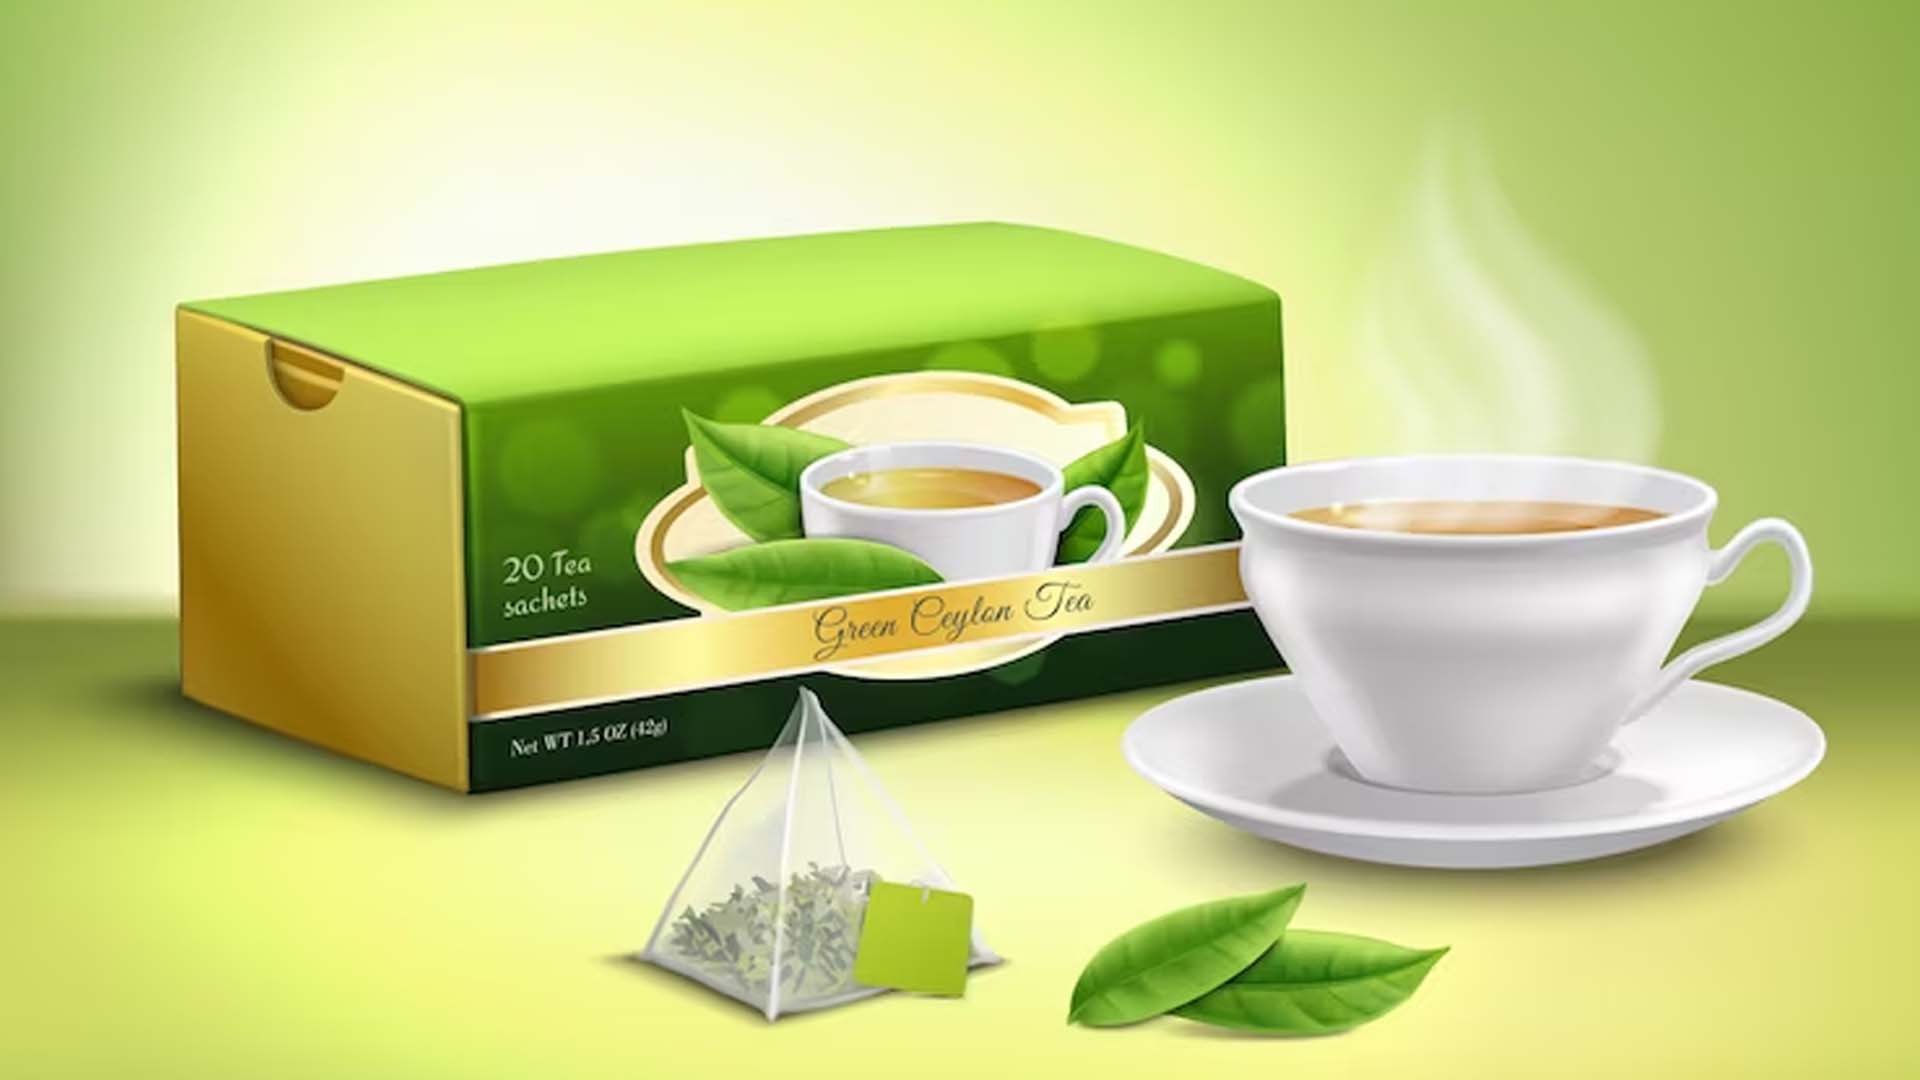 Does Green Tea Cause Acidity?